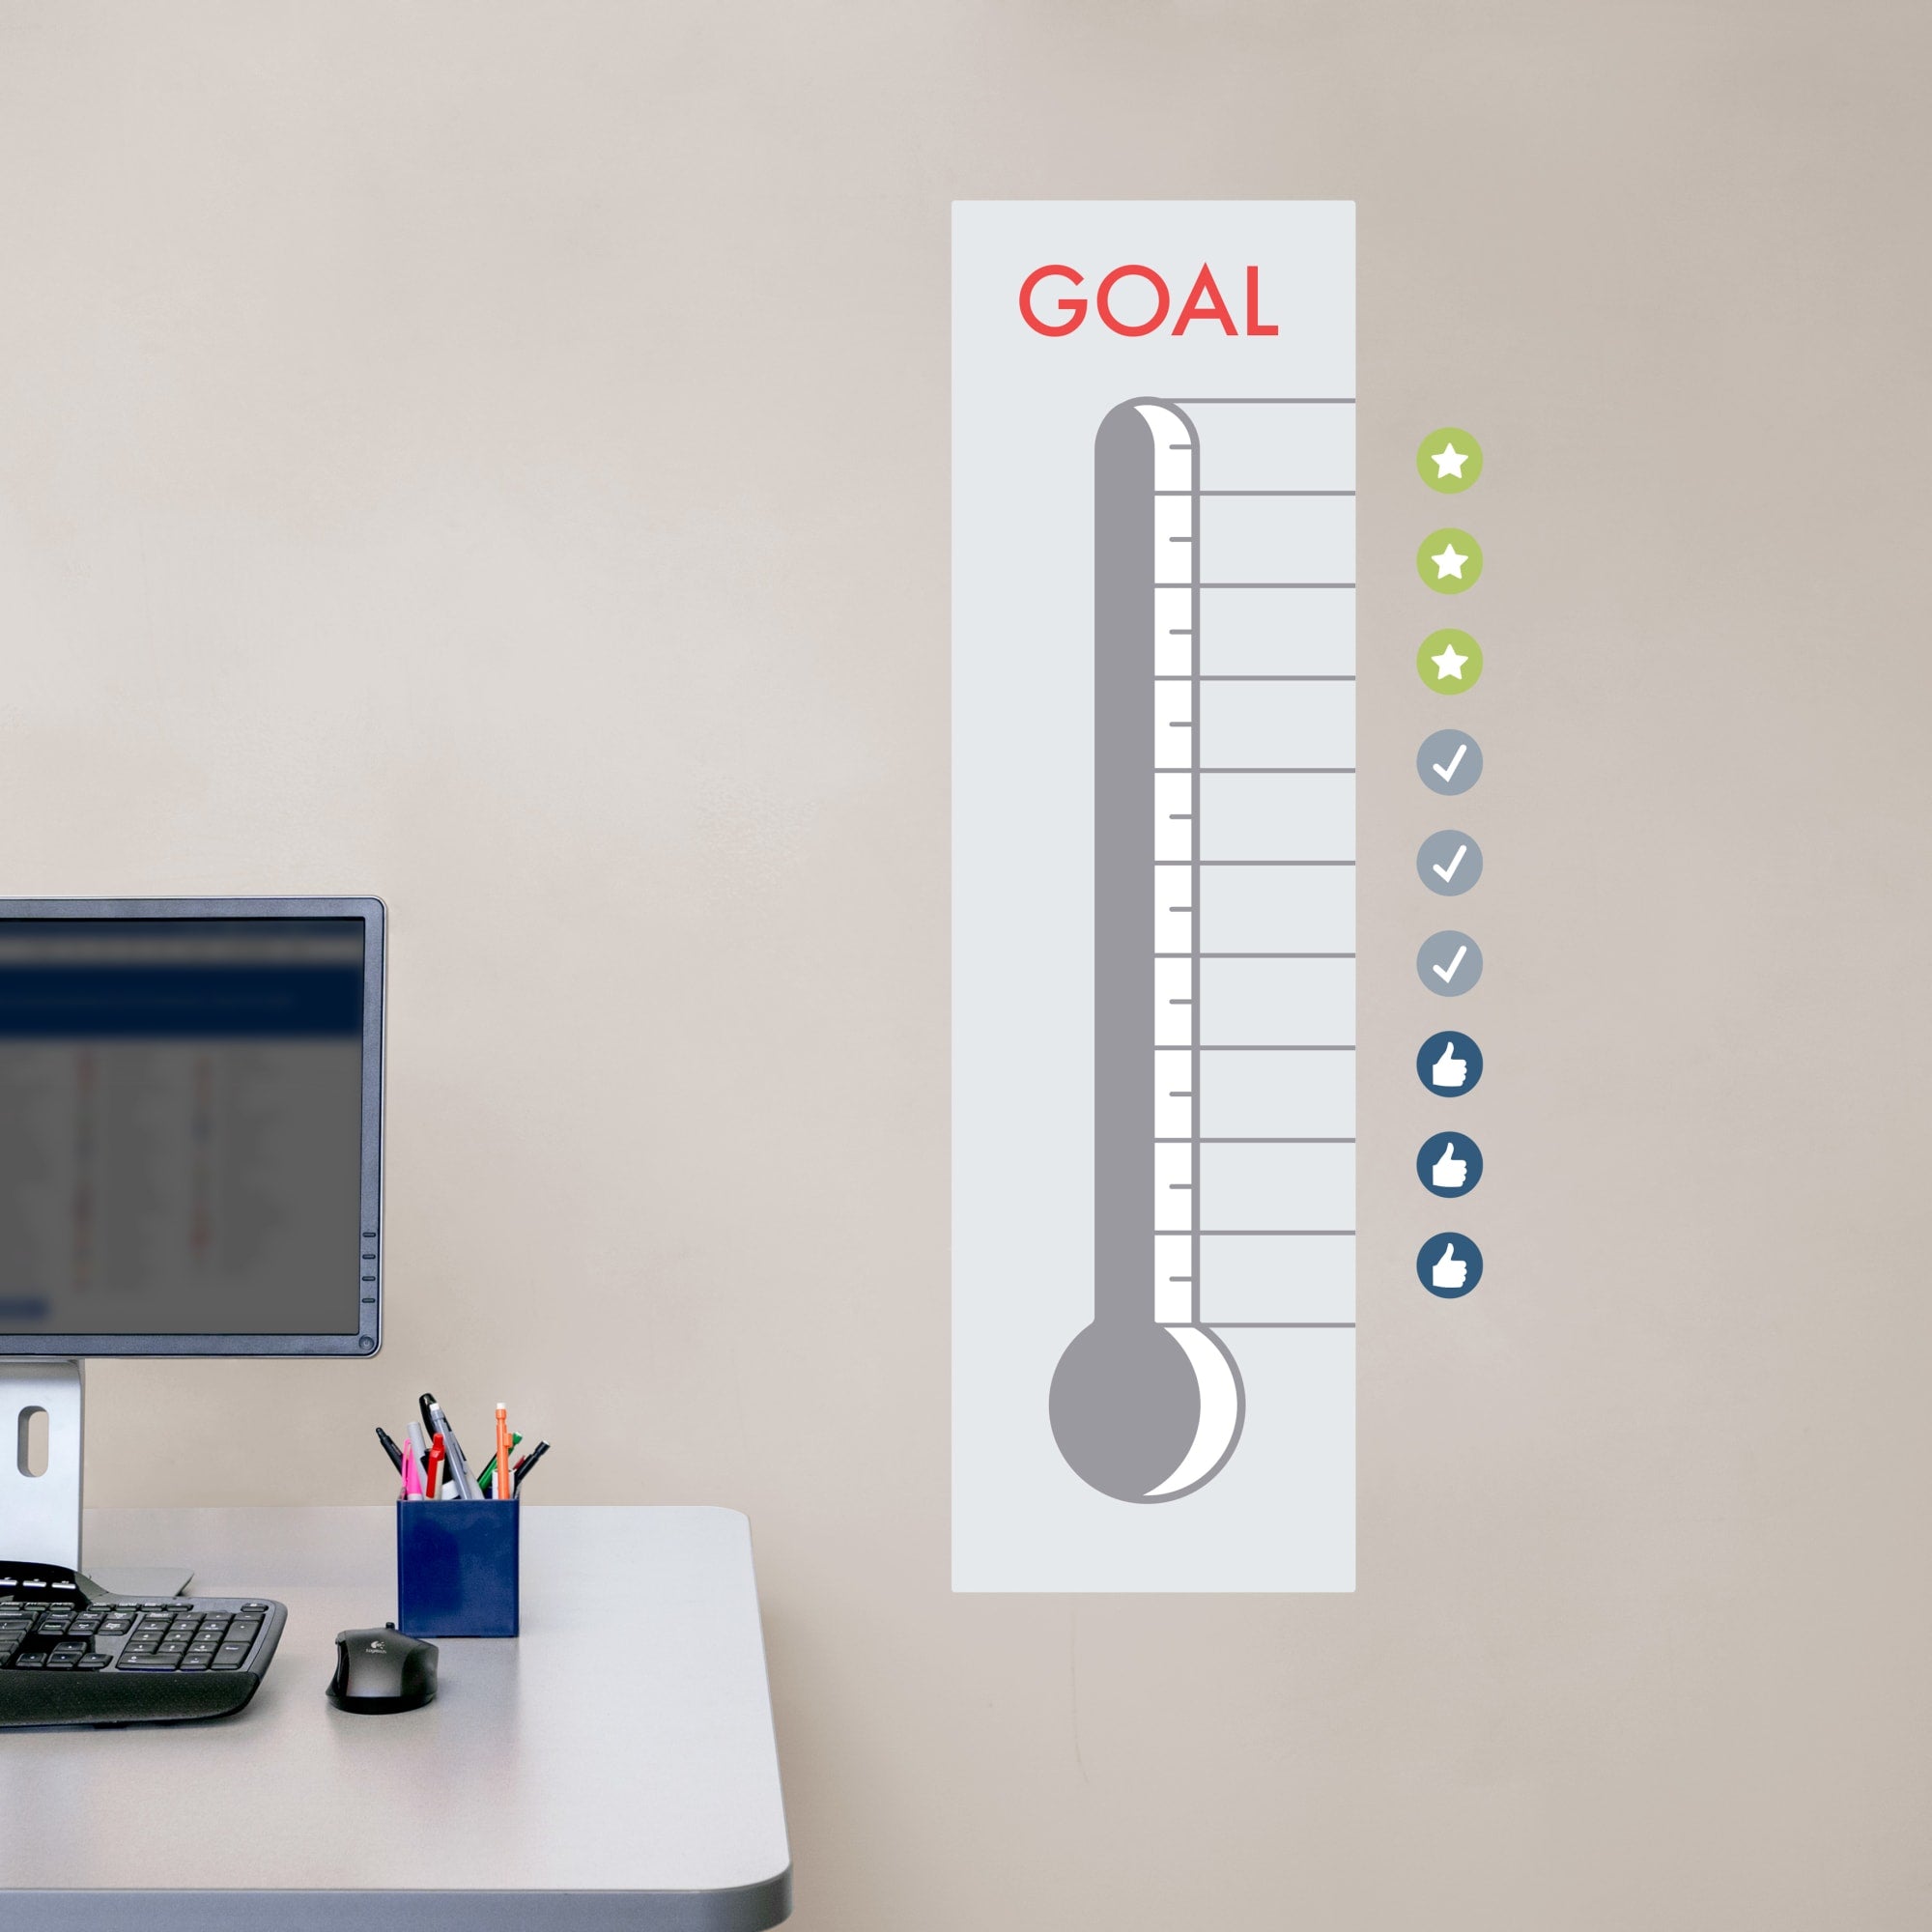 Goal Thermometer: Modern Design - Removable Dry Erase Vinyl Decal 11.0"W x 40.0"H by Fathead